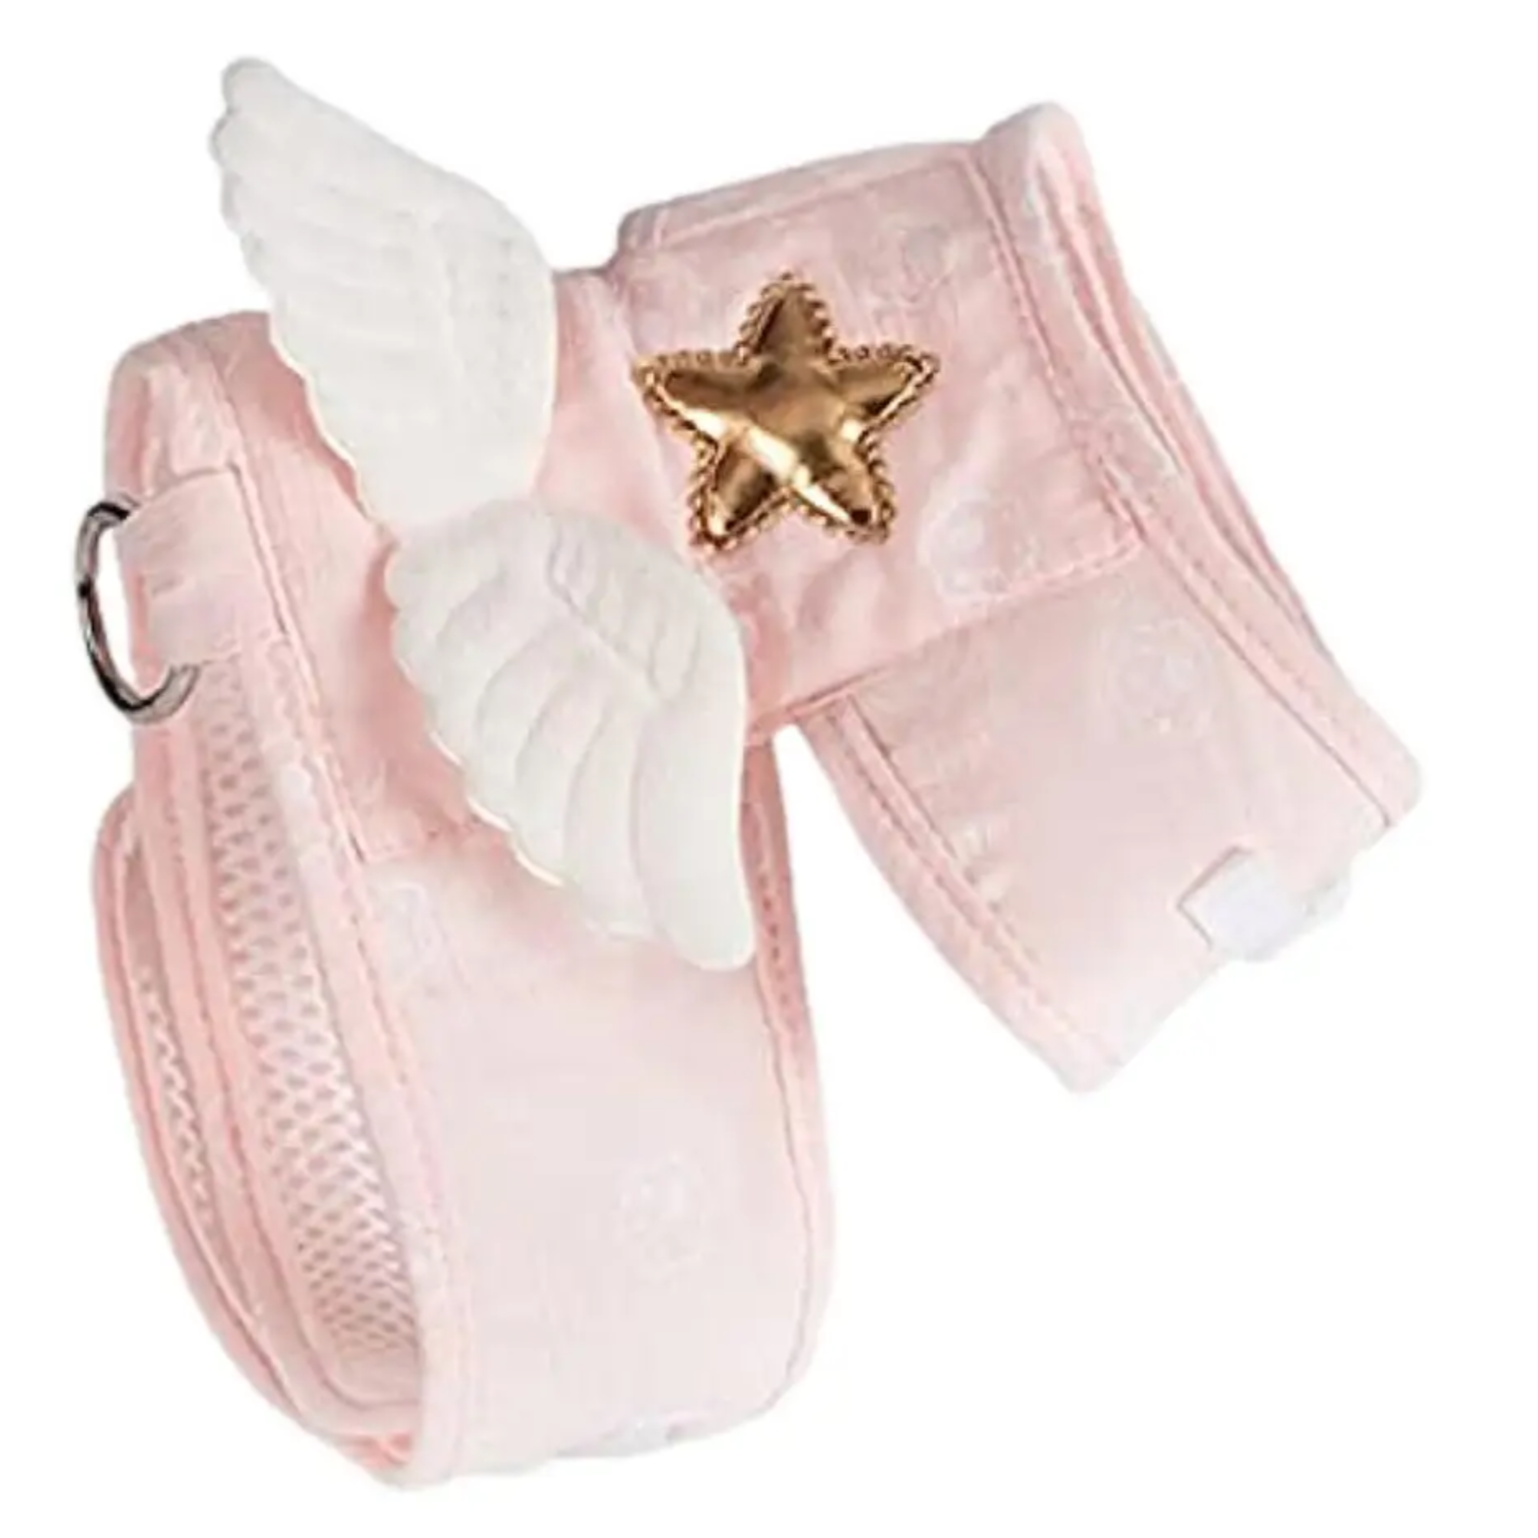 Angel Wings Harness and Leash Set